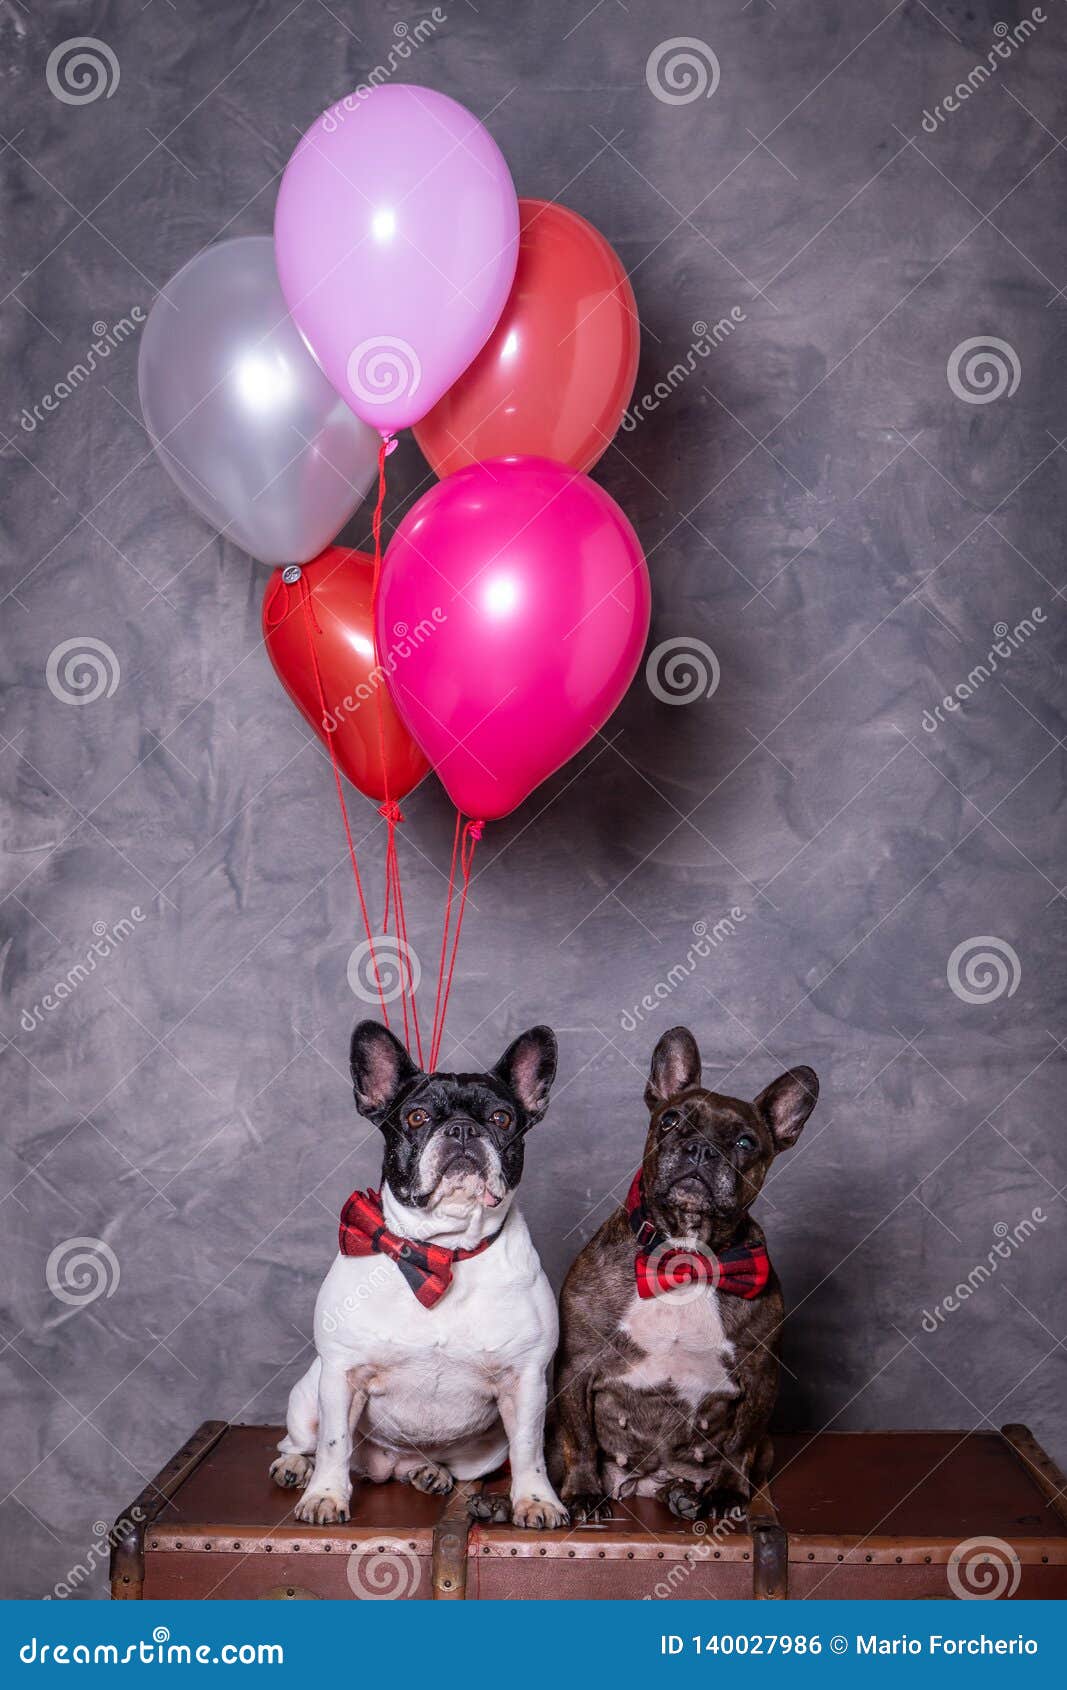 two french bulldog posing with red tie and colored balloons